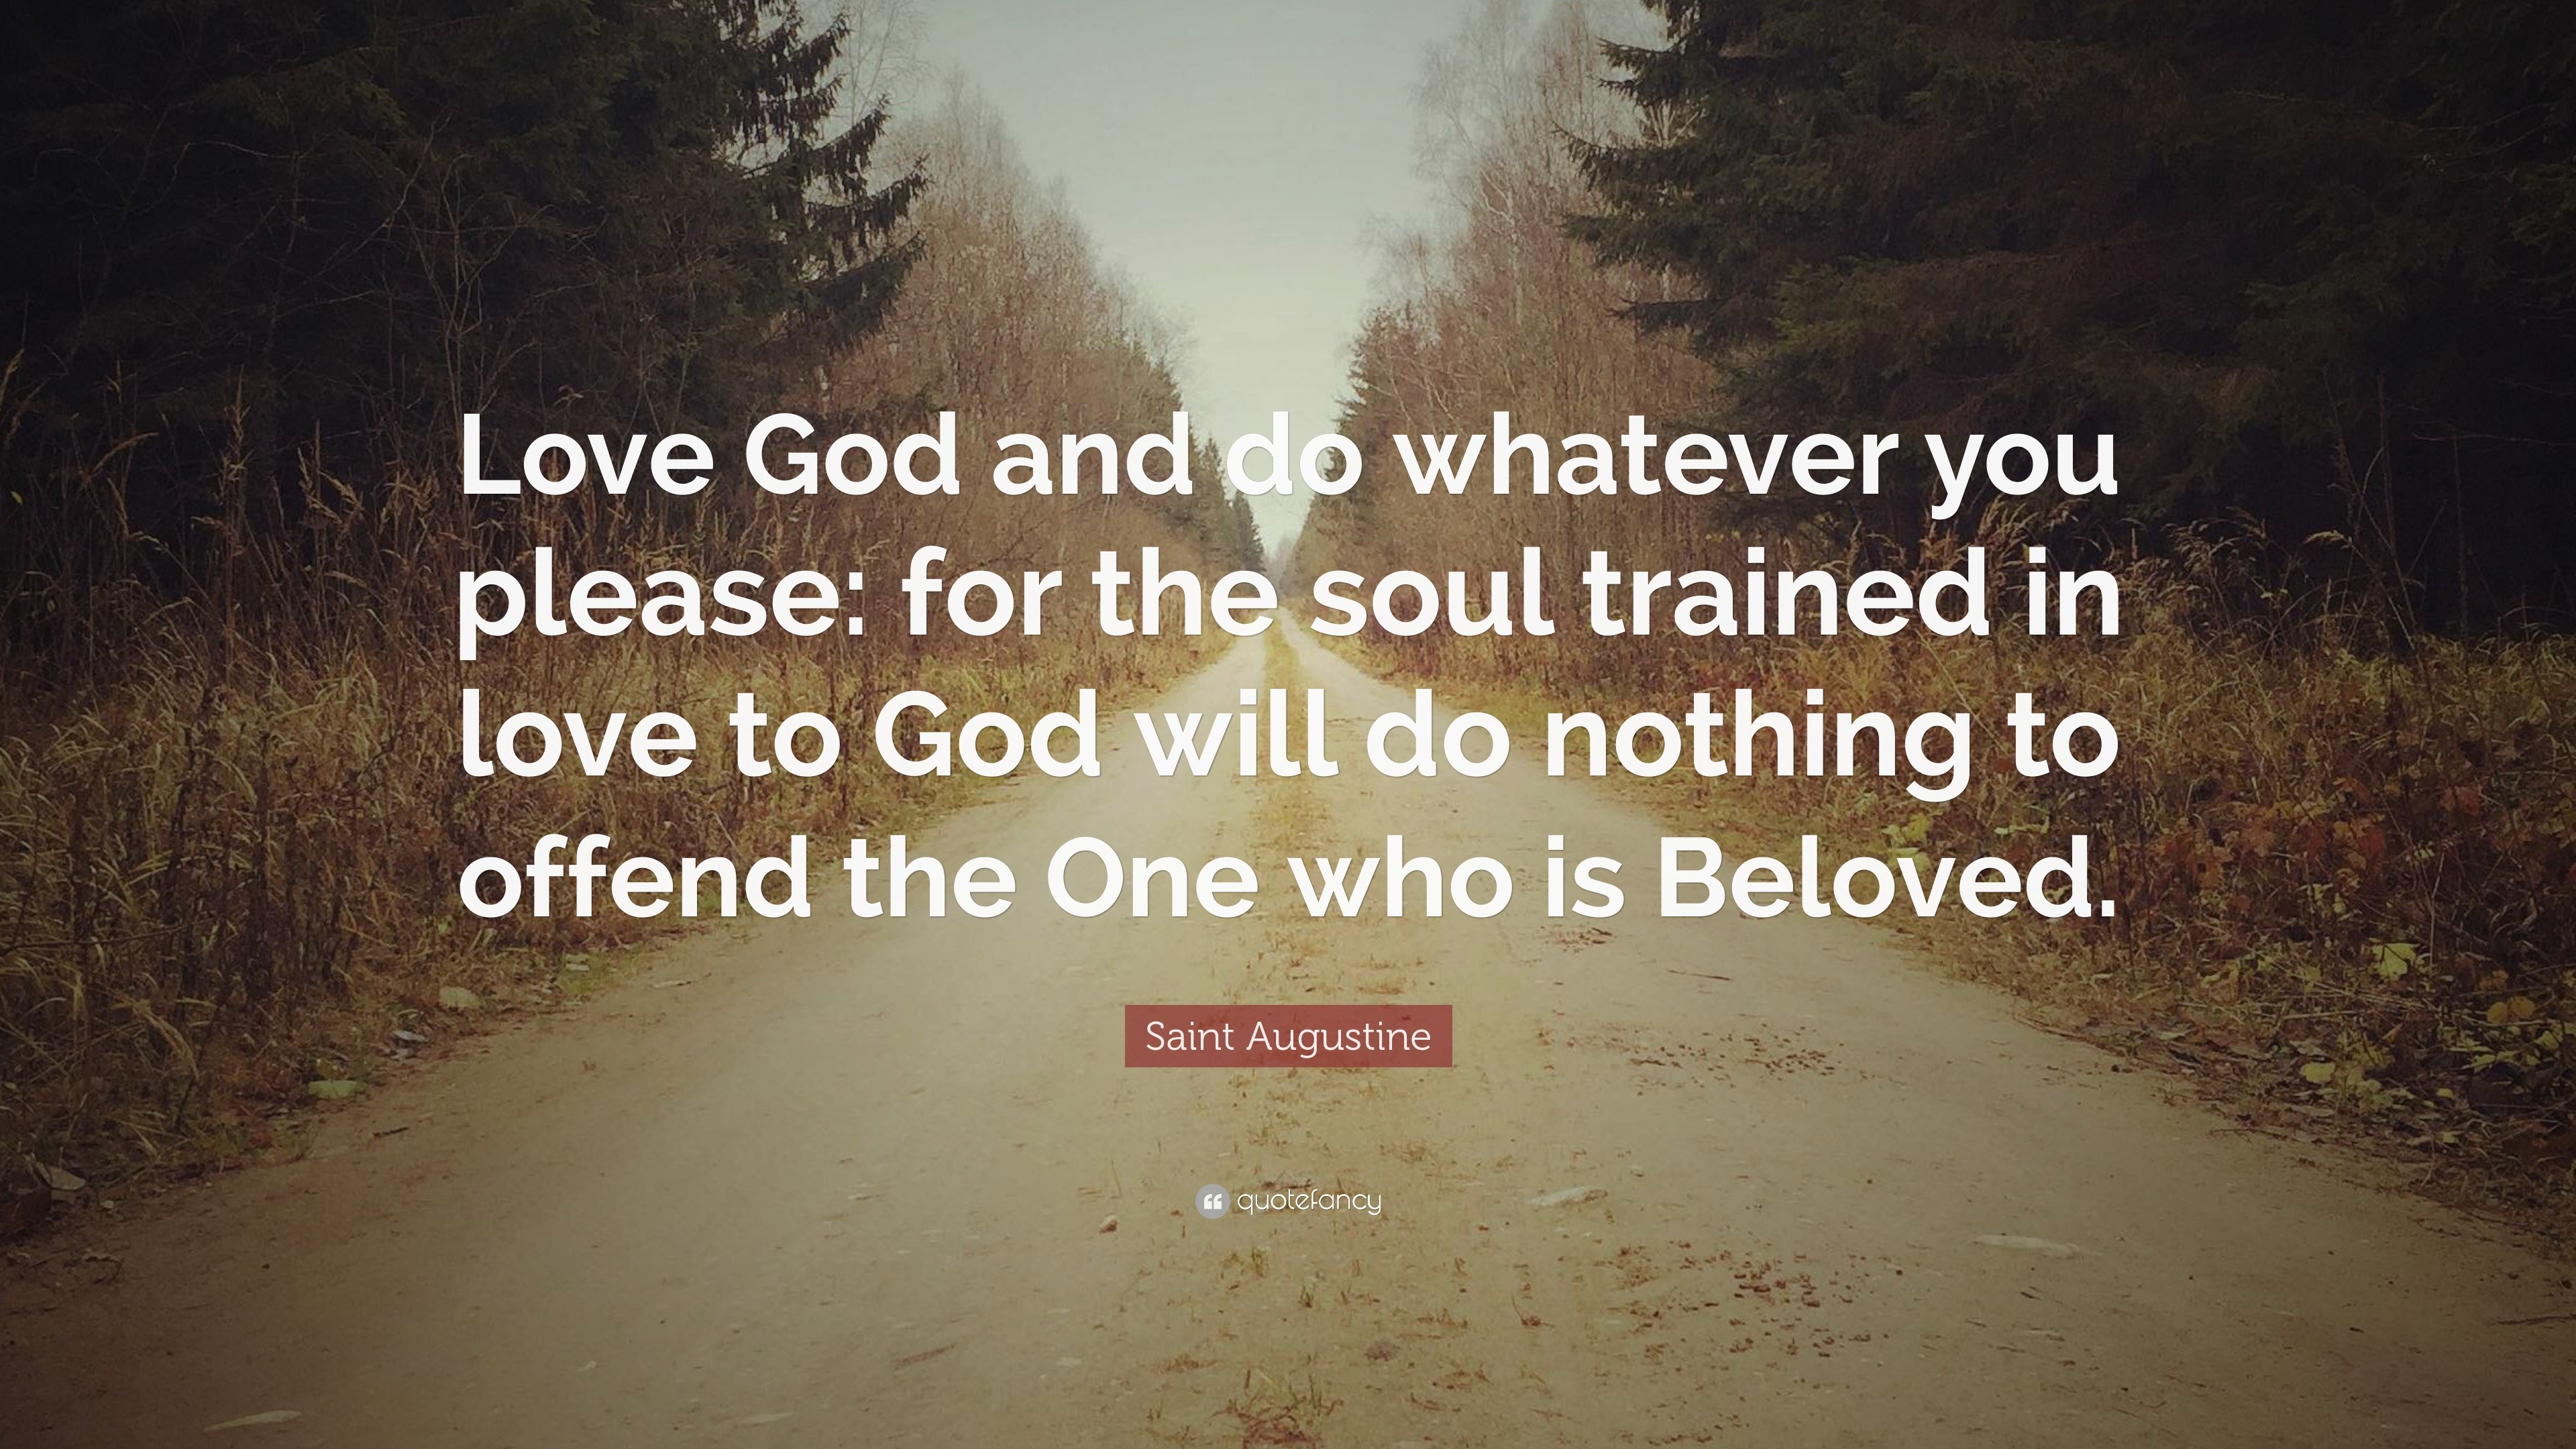 Saint Augustine Quote “Love God and do whatever you please for the soul